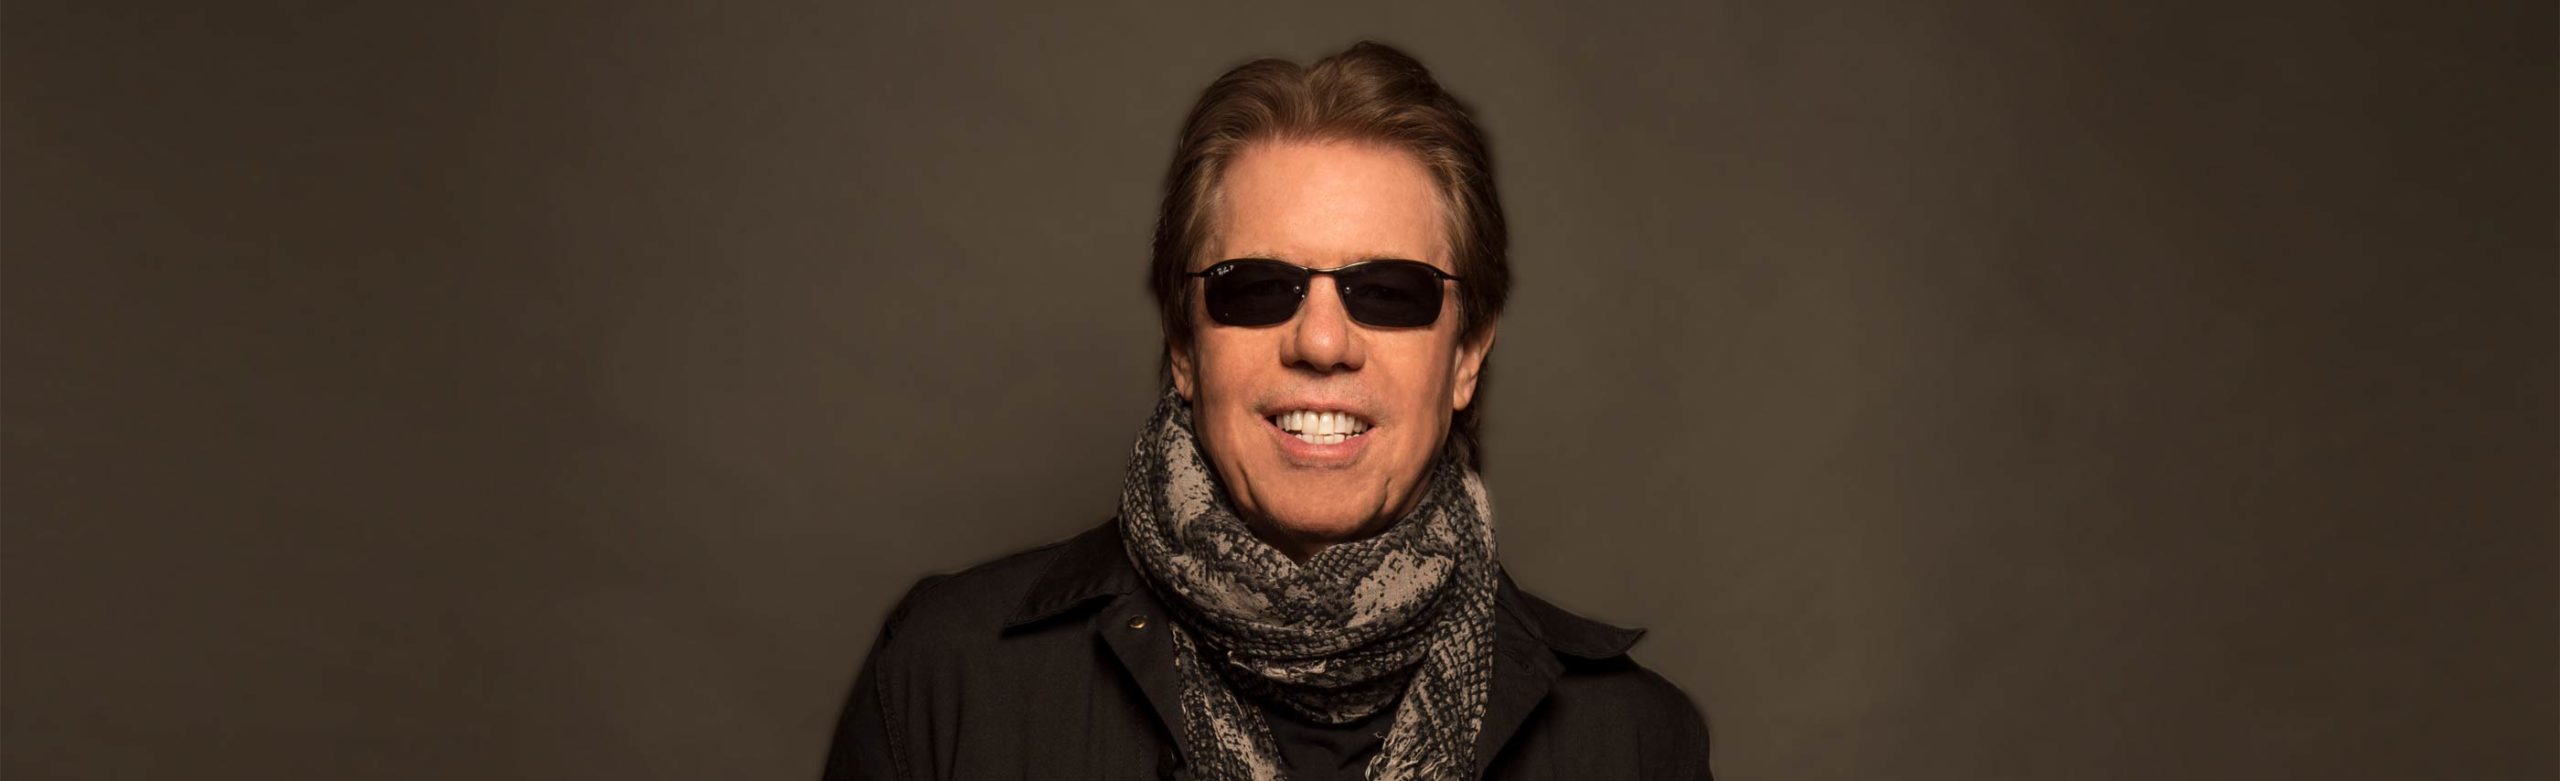 George Thorogood & The Destroyers Tickets + Autographed Vinyl & Poster Giveaway Image